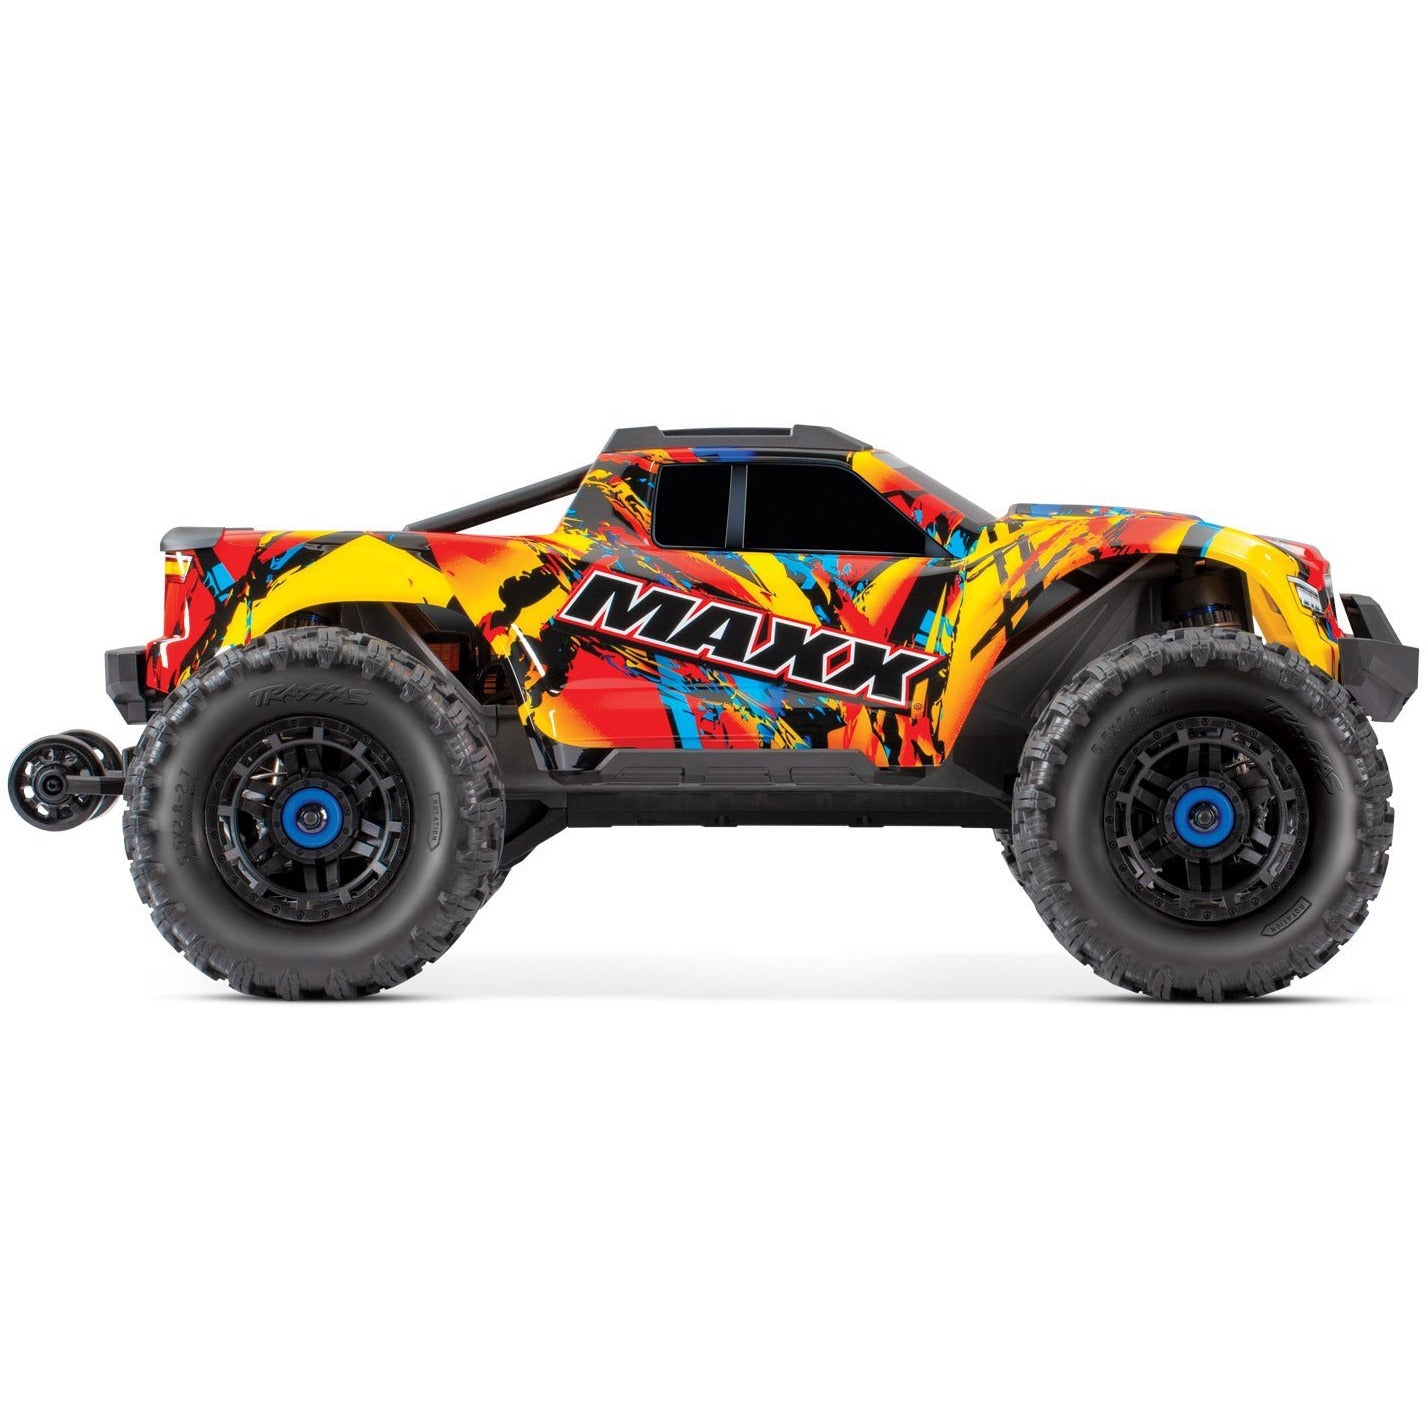 TRAXXAS 1/10 Maxx 4WD Brushless Electric Monster Truck - Solar Flare